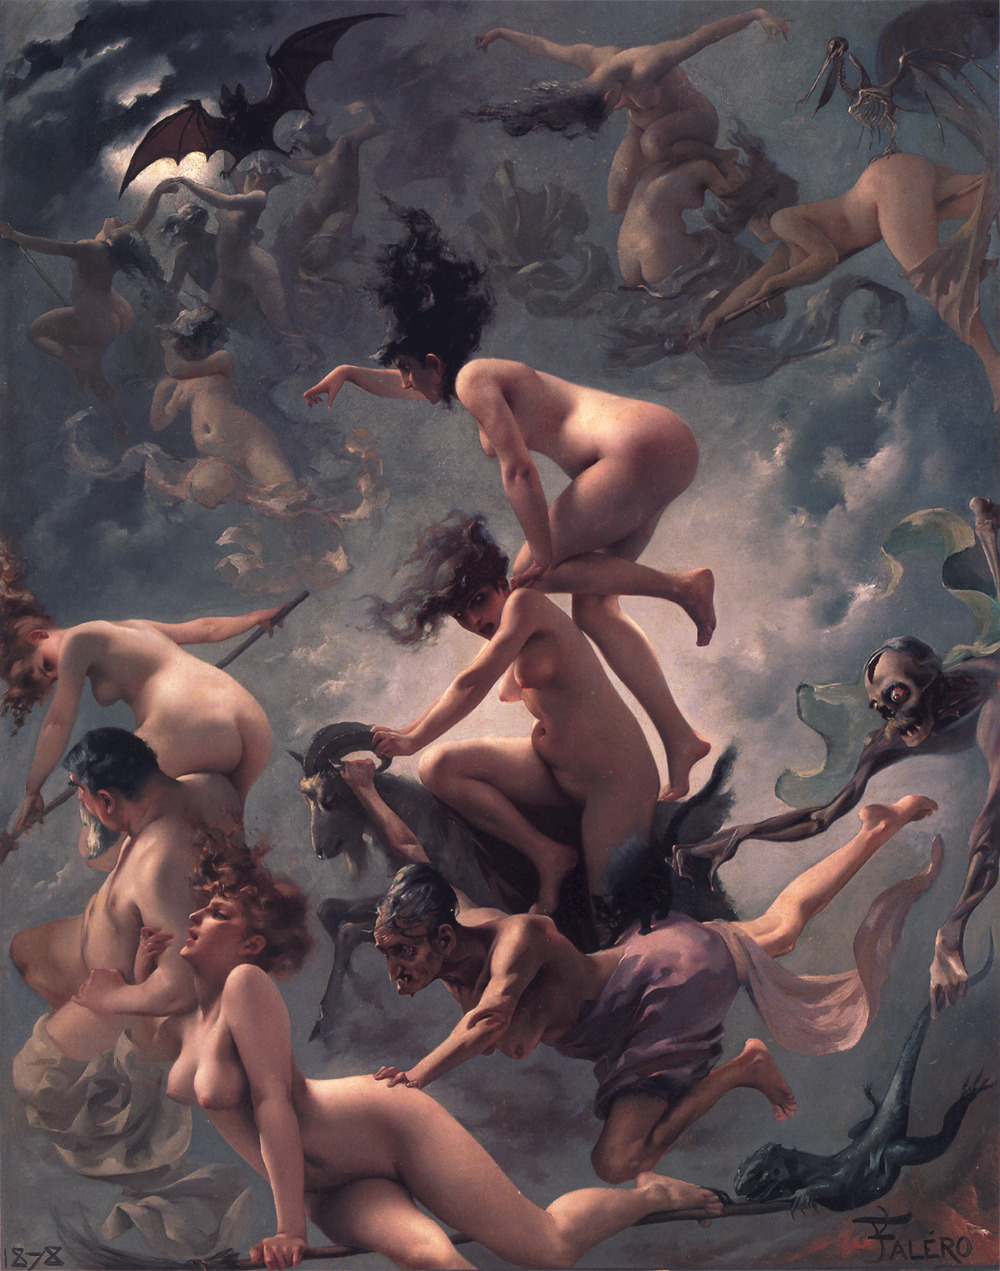 The Vision of Faust (Departure of the Witches) by Luis Ricardo Faléro, 1878.